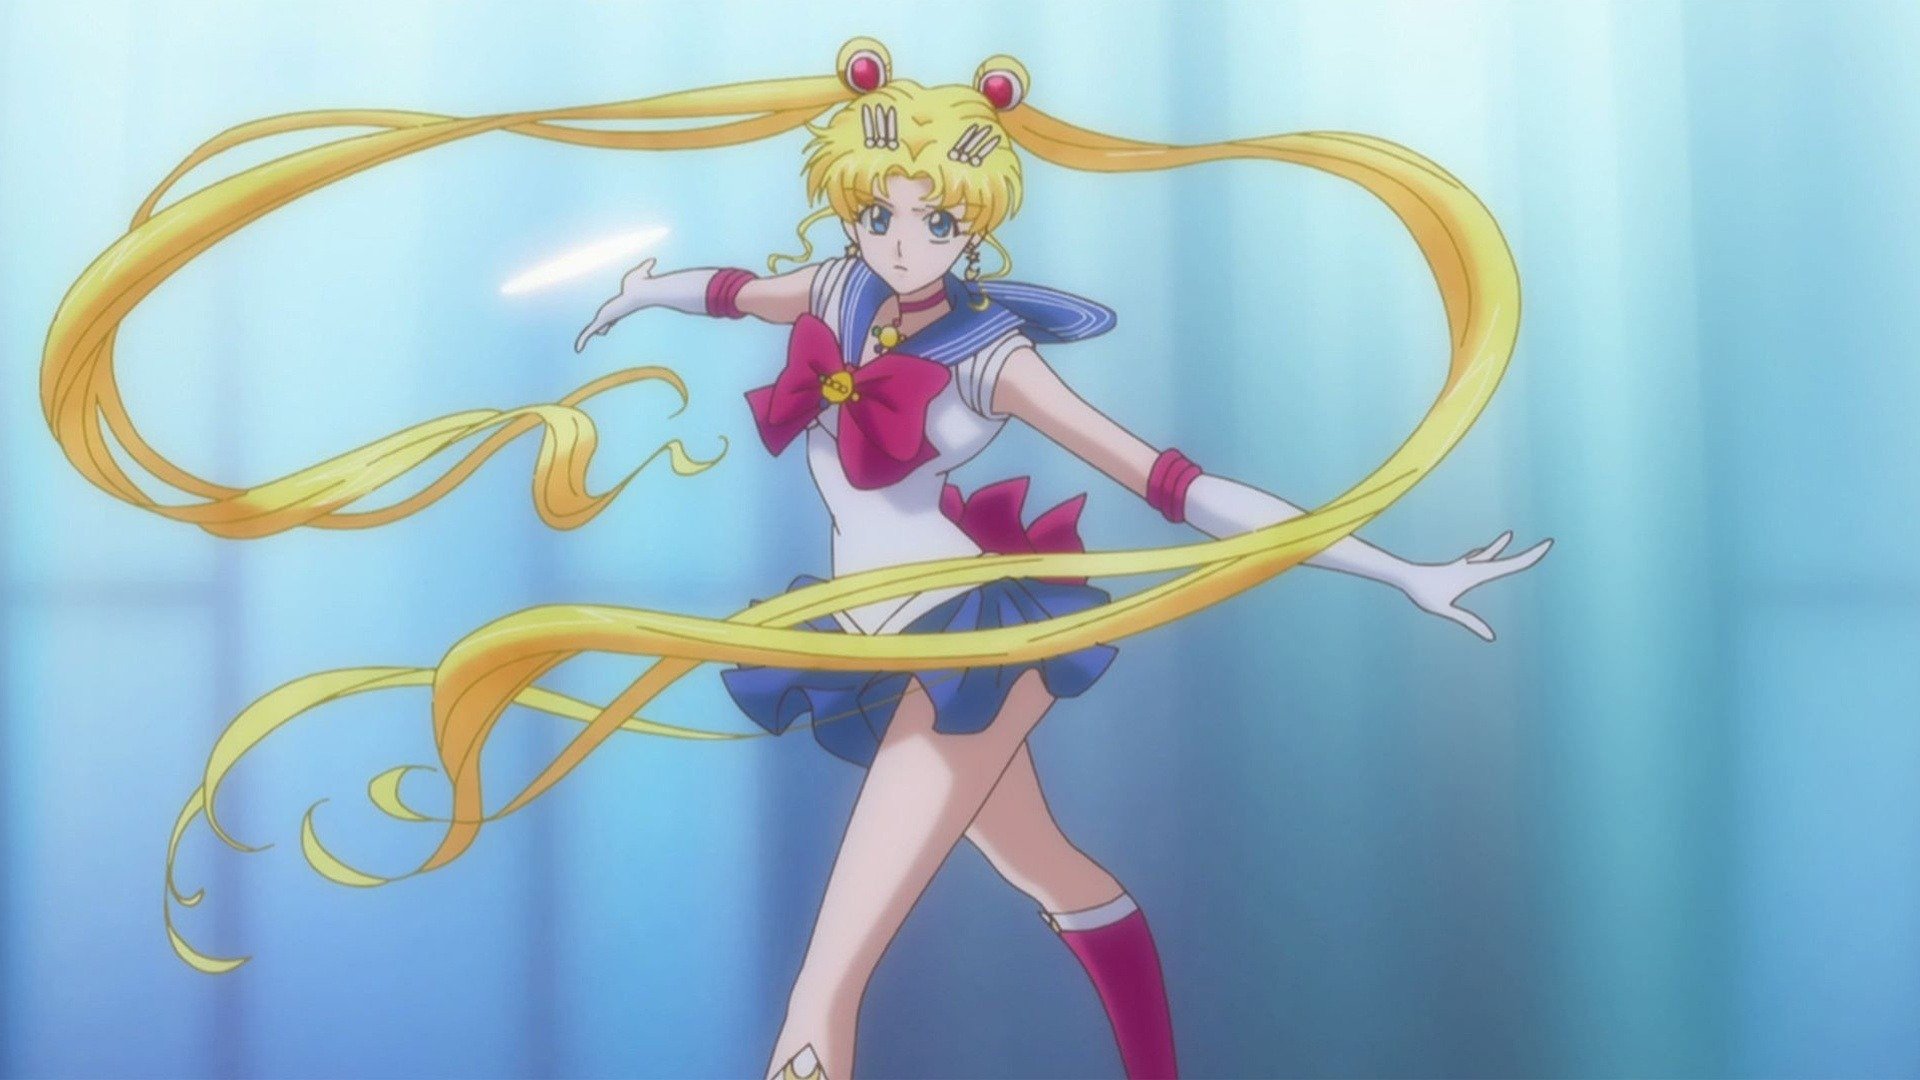 A New Set Of Sailor Moon Figures Bring The 90s Anime Designs To Your Shelf!  – NERDIER TIDES